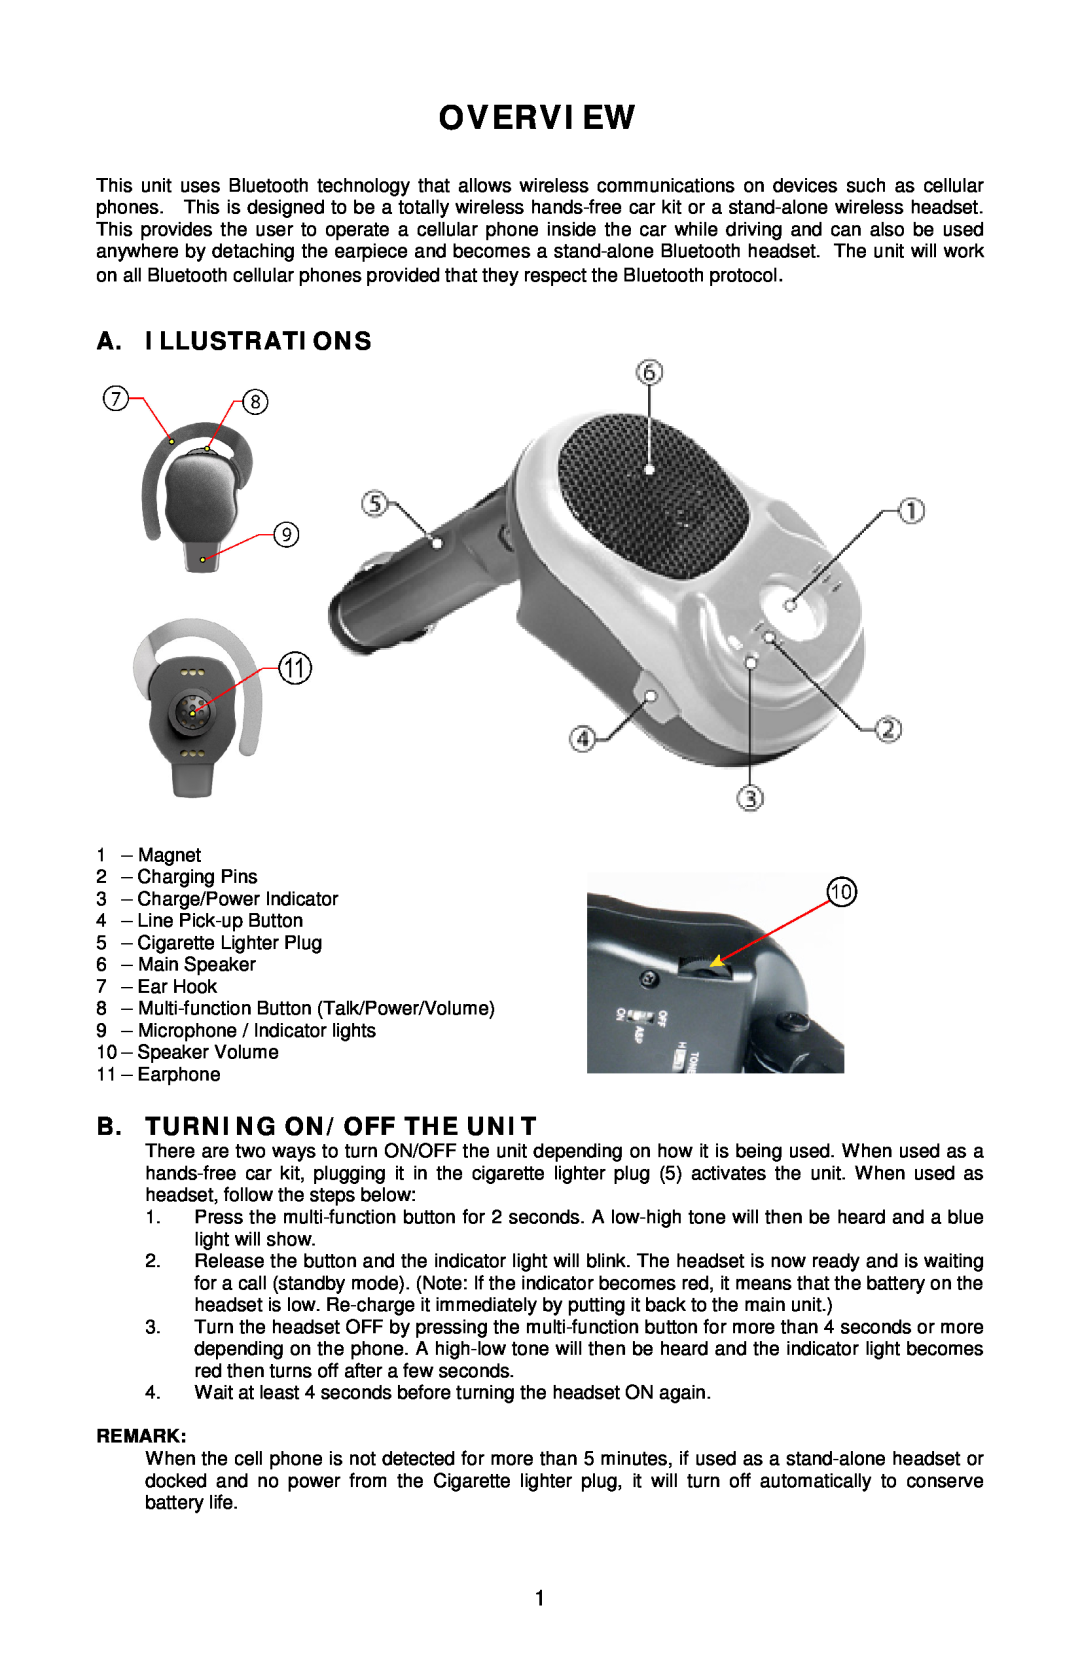 Sony Ericsson Bluetooth Enabled Hands-Free Kit /Headset A. I Llustrati On S, B. Turn I N G On / Off Th E Un I T, Overvi Ew 